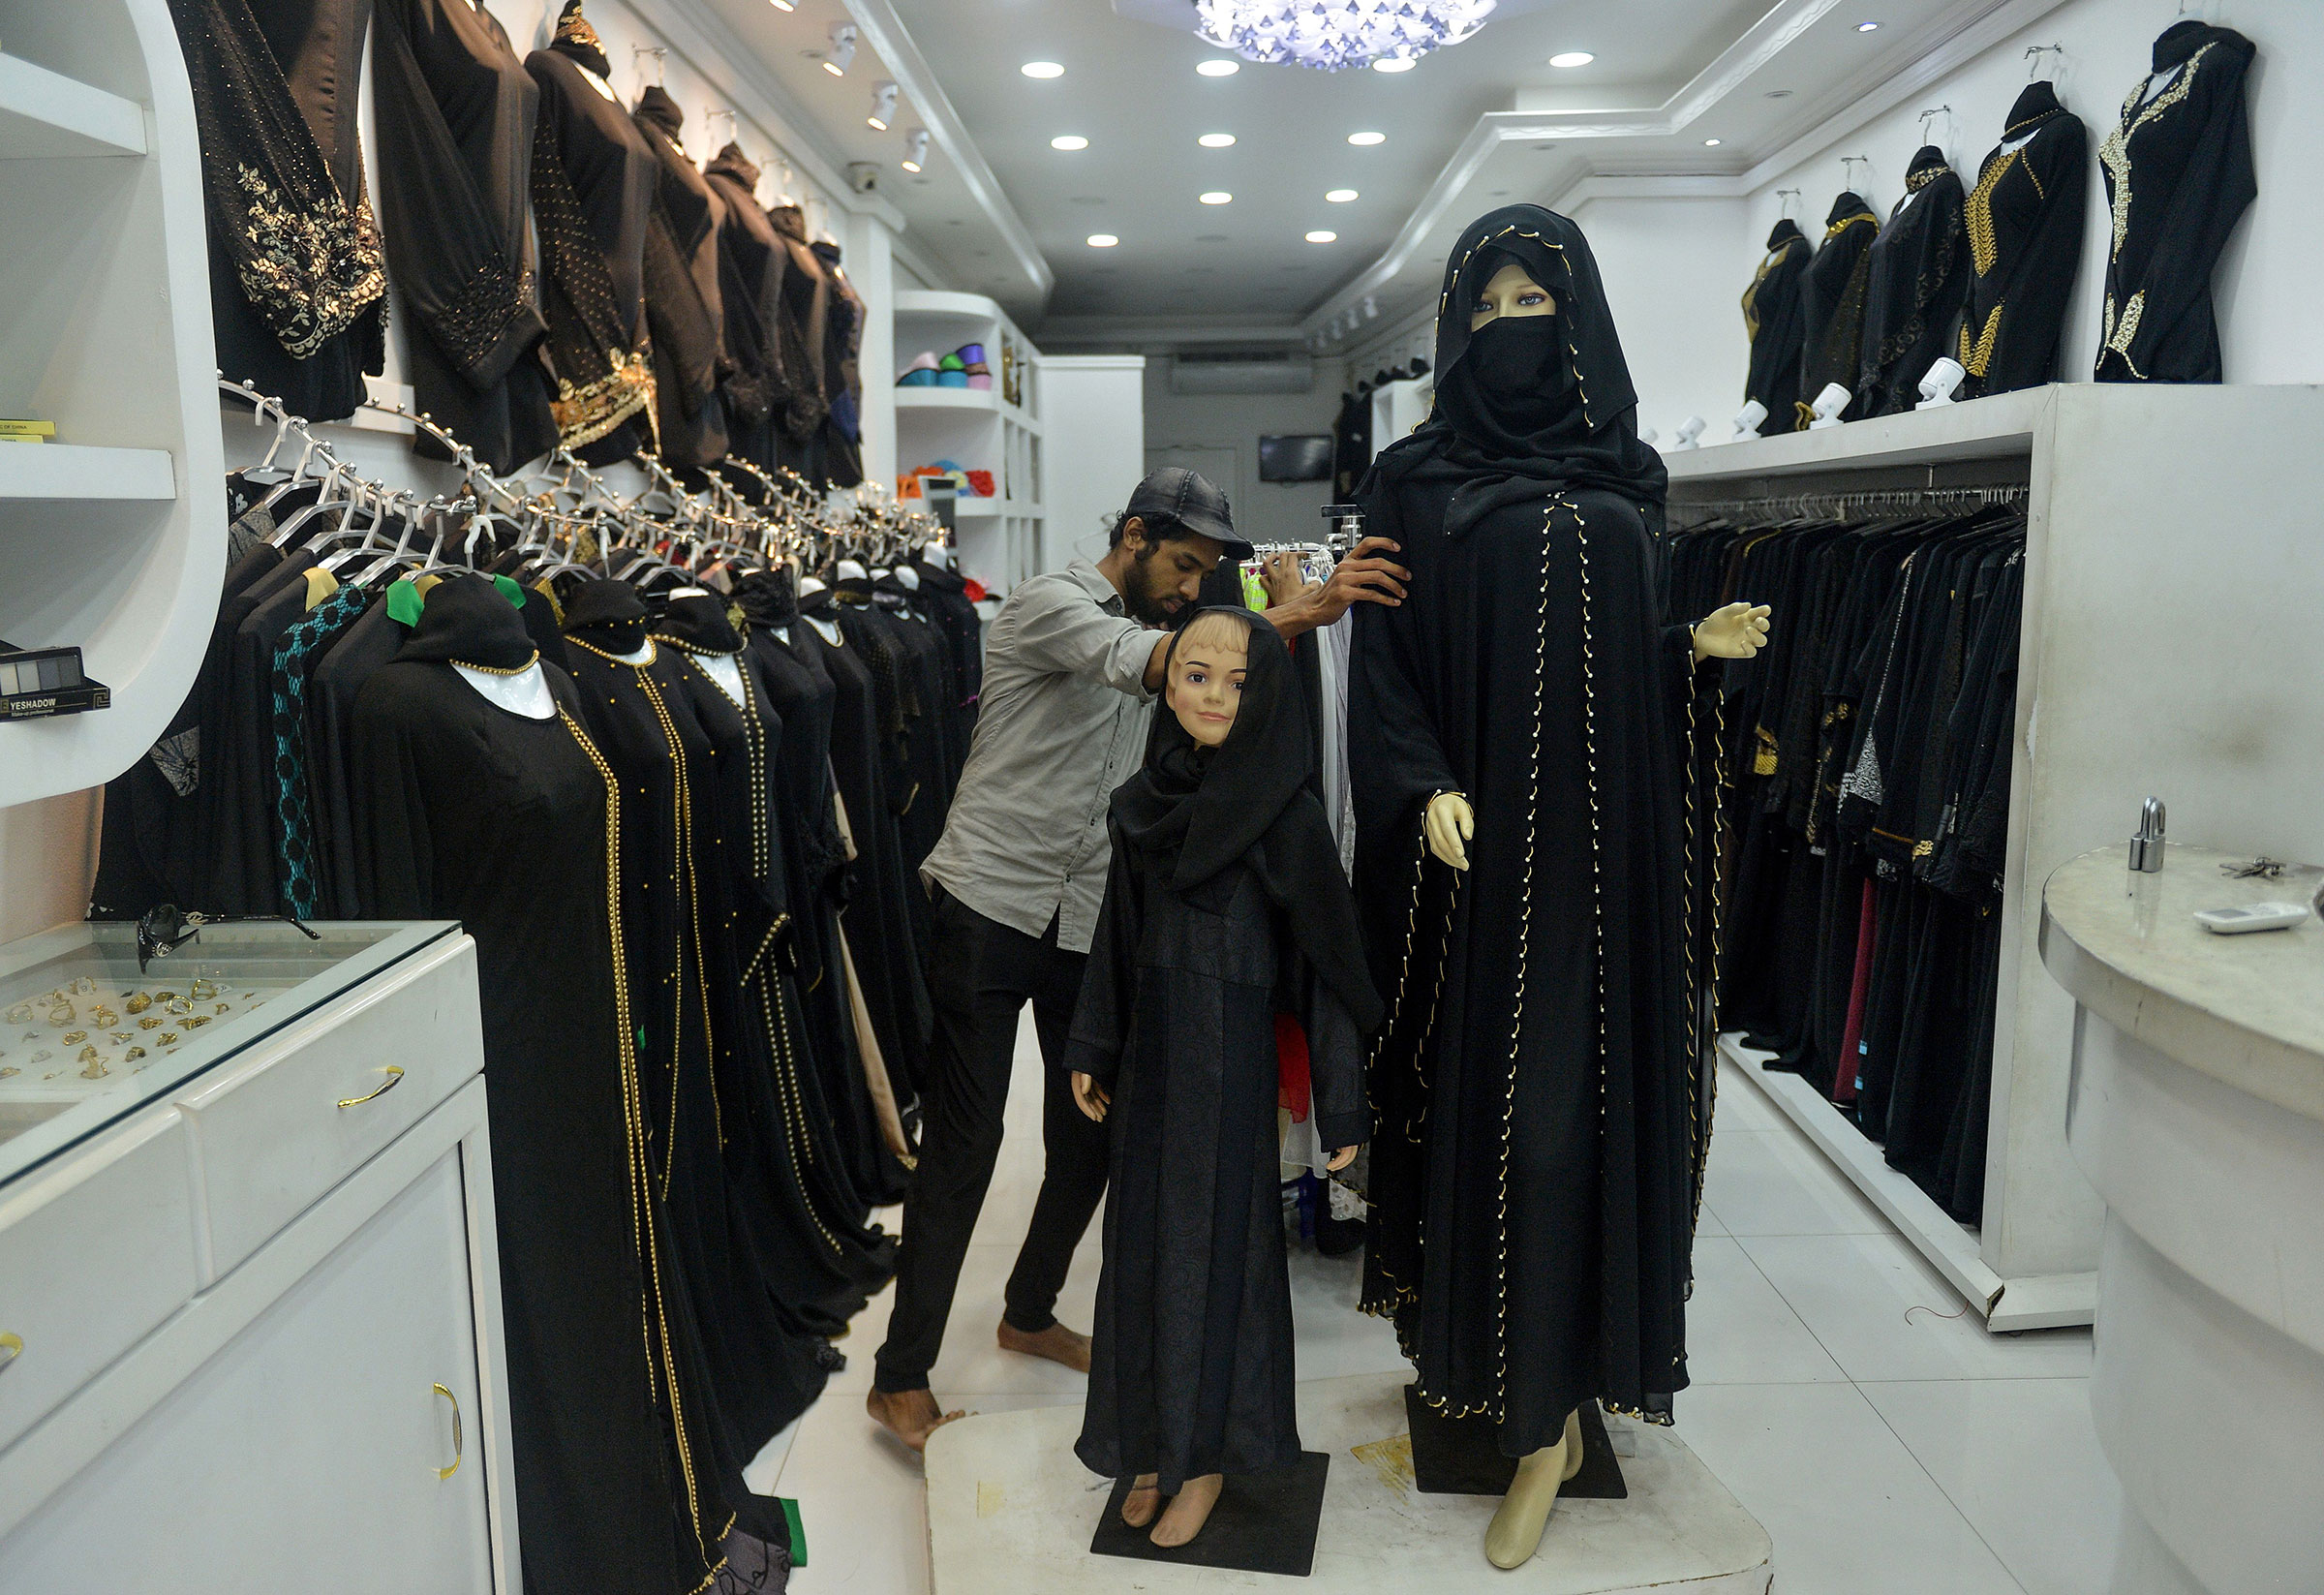 A Sri Lankan vendor shows a full face veil, called a niqab, at a shop selling clothes for Muslim women in Colombo on April 30, 2019. Religious tensions and a government ban on covering the face since the Easter Sunday suicide attacks have forced conservative Muslim women in Sri Lanka to shun veils, head scarves and long robes in public. (Ishara S. Kodikara—AFP/Getty Images)